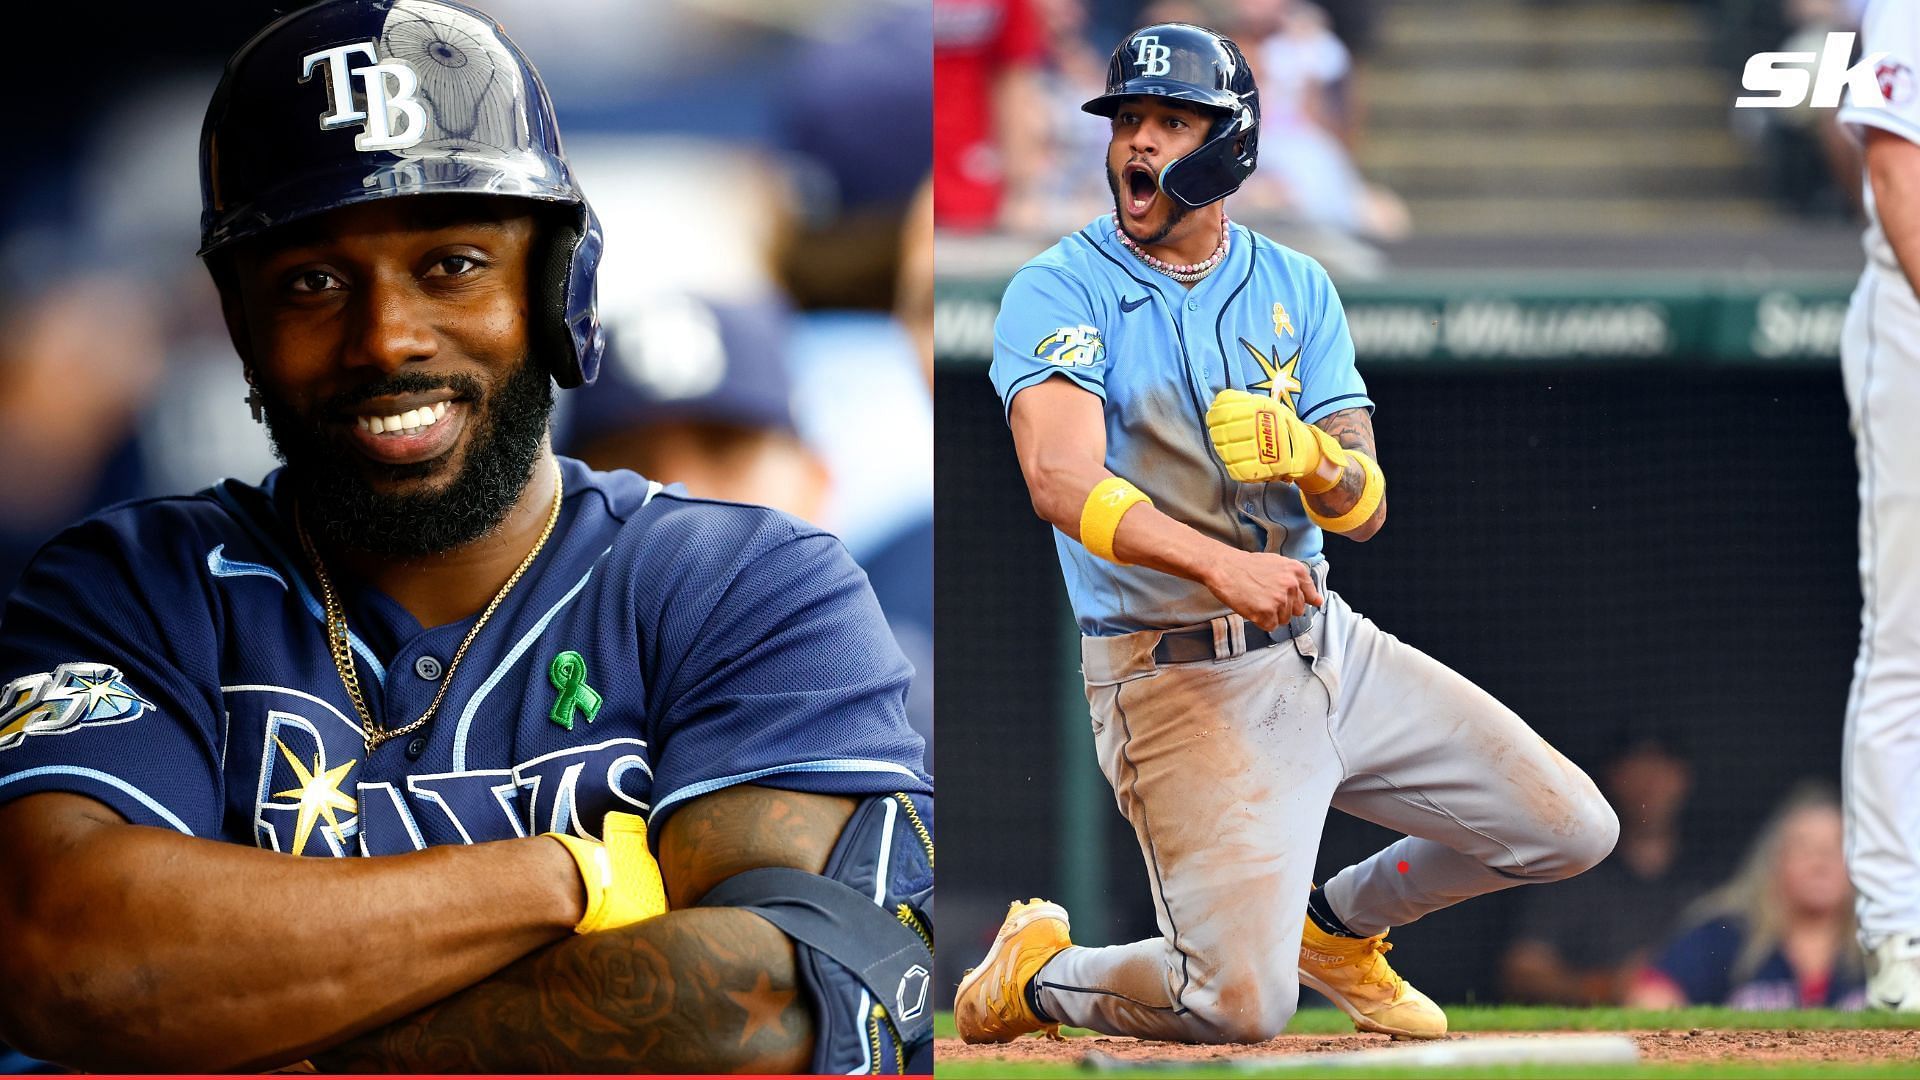 MLB fans love the Tampa Bay Rays new City Connect uniforms